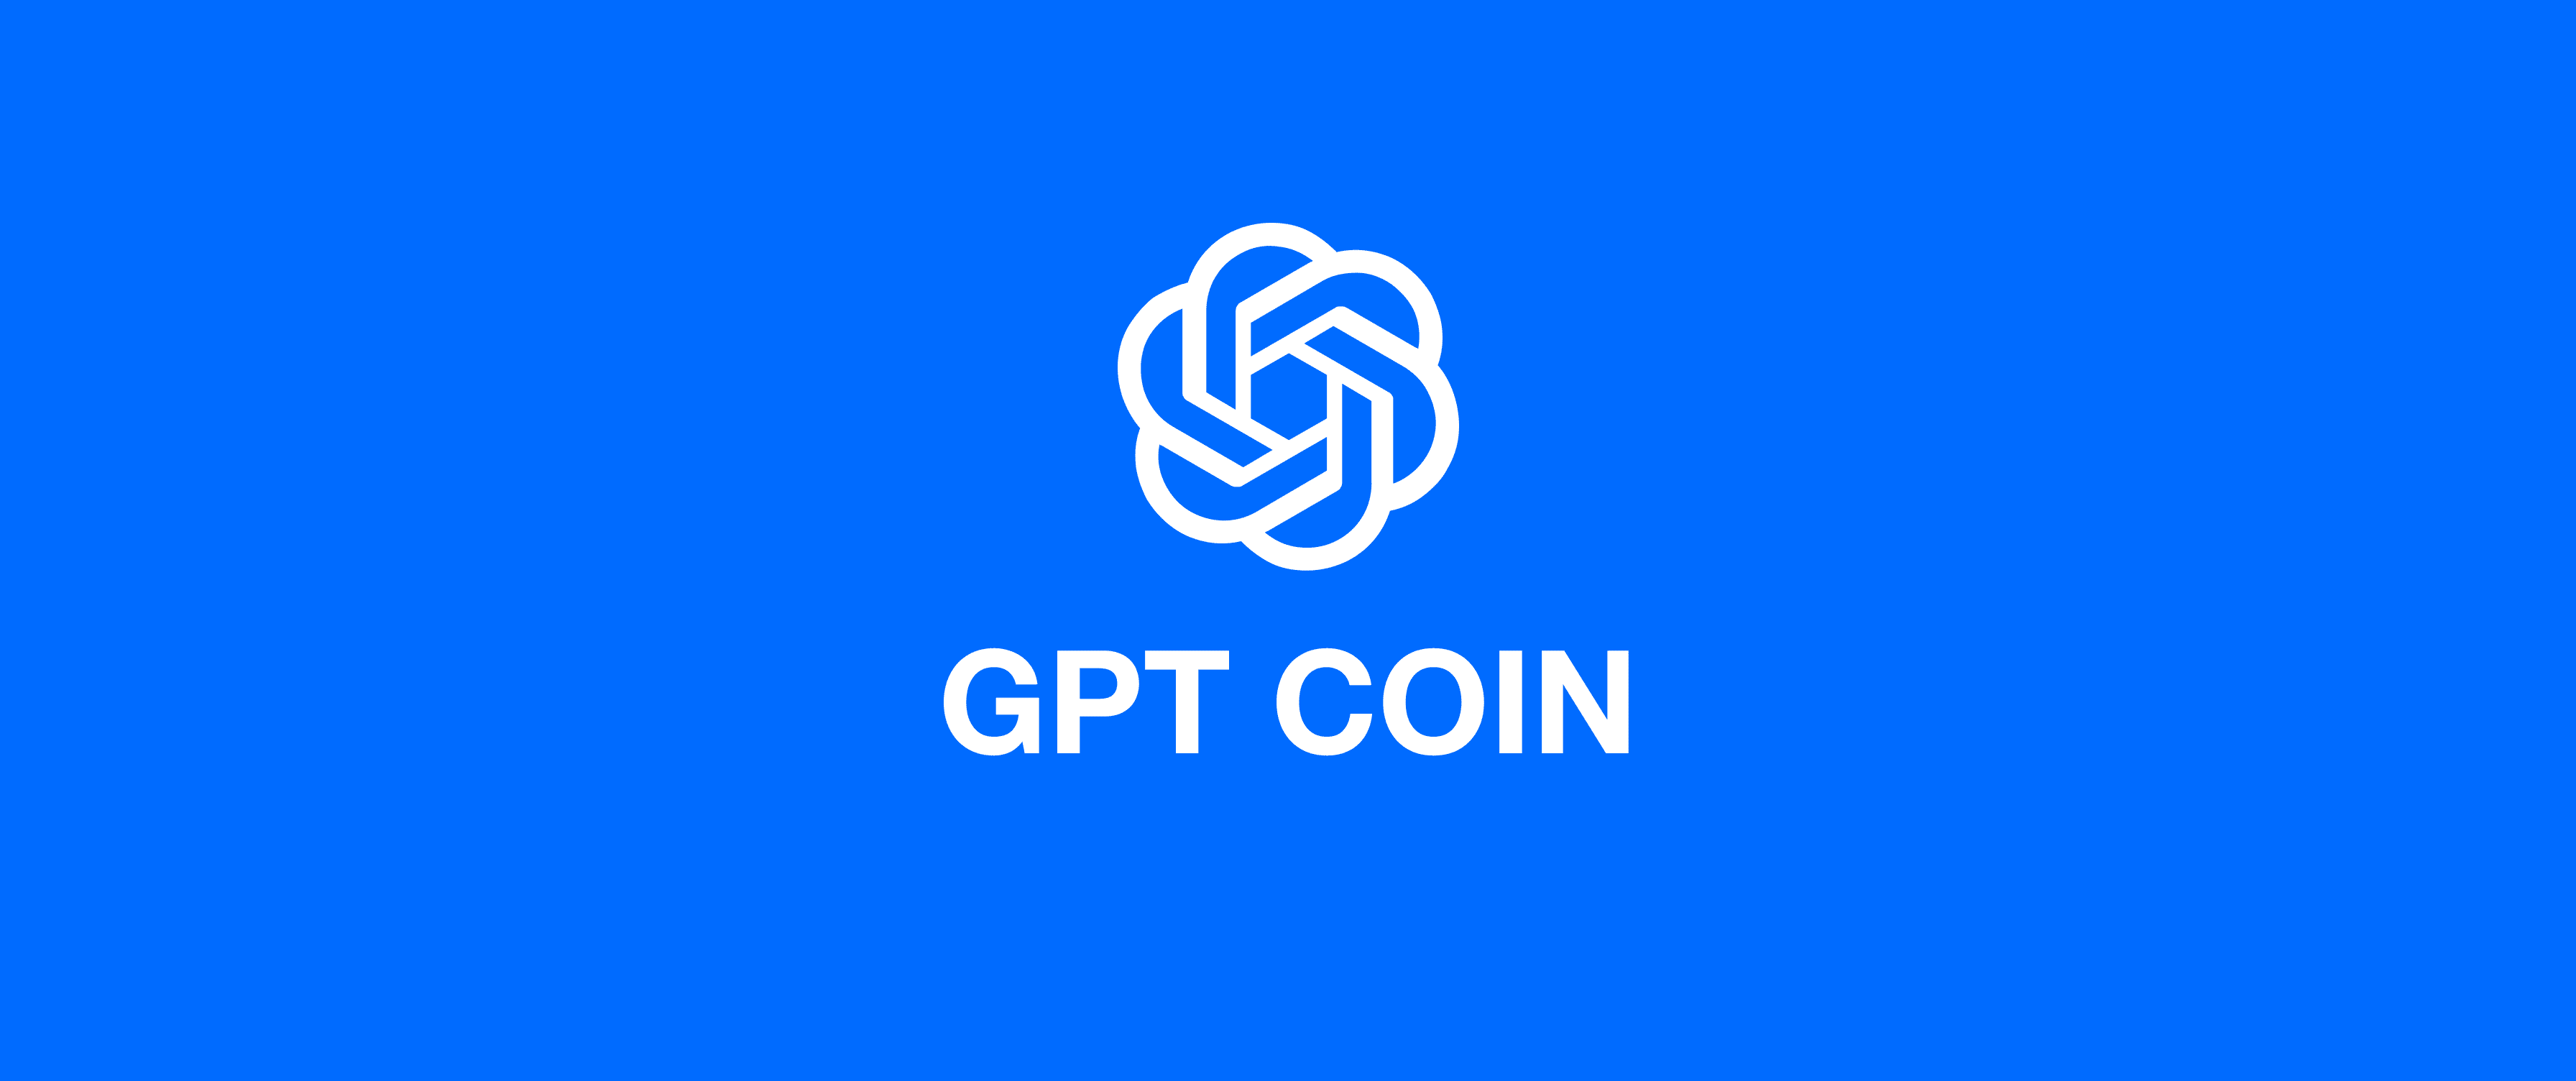 CryptoGPT Price Today - GPT Price Chart & Market Cap | CoinCodex